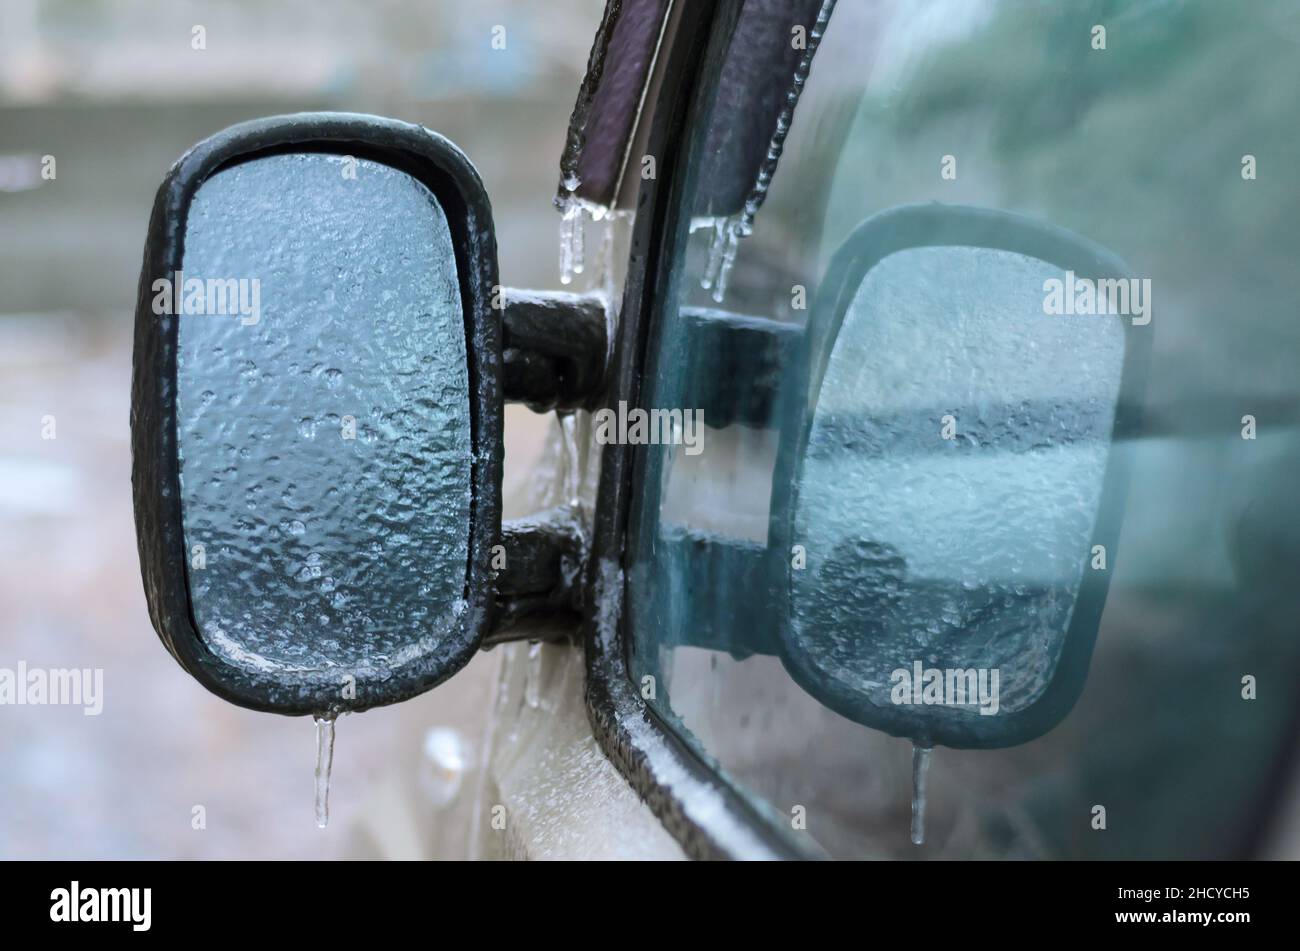 Freezing of ice on the car mirror during atmospheric icing. Bad driving weather. Stock Photo